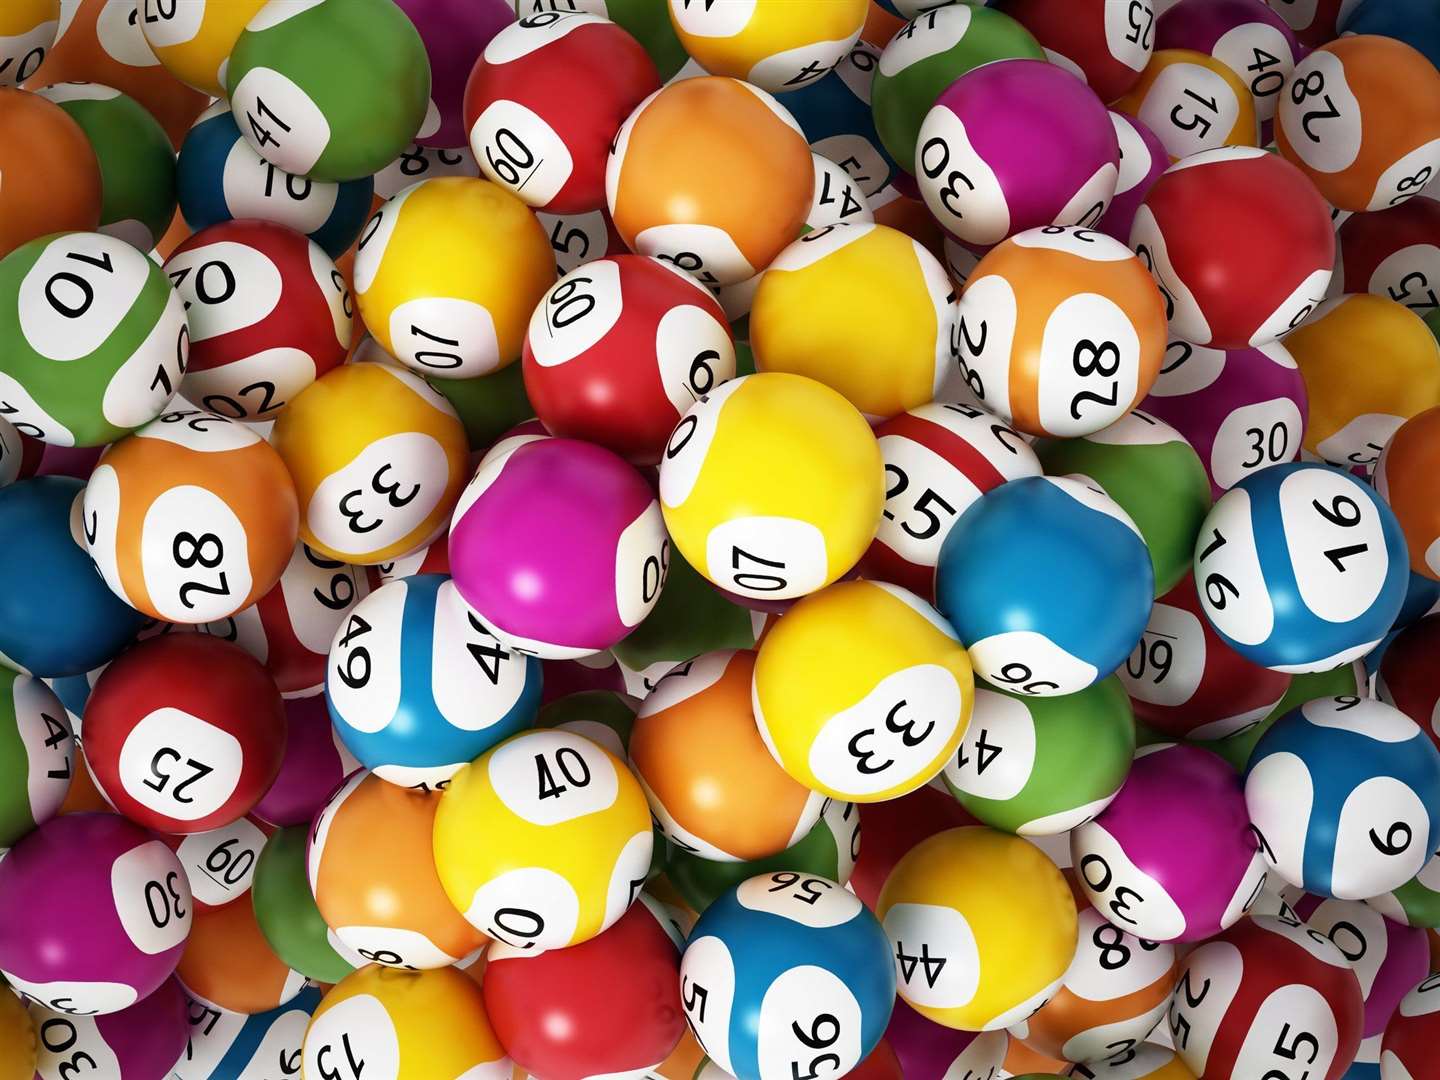 A man from Kent has won £1 million in the lottery